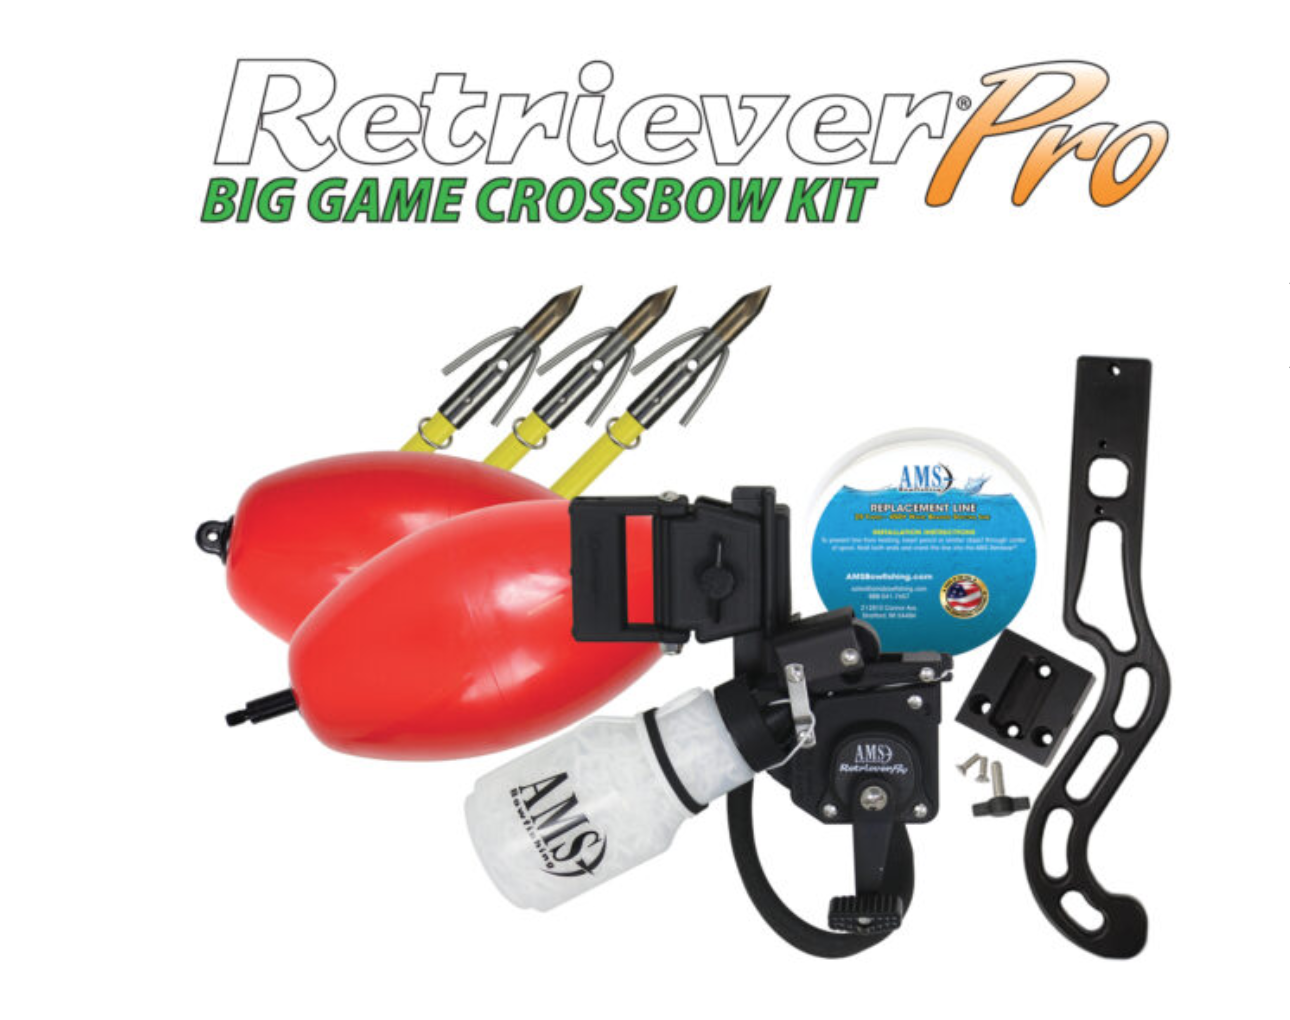  AMS Bowfishing Big Game Crossbow Kit - Left Hand - Made in The  USA : Sports & Outdoors